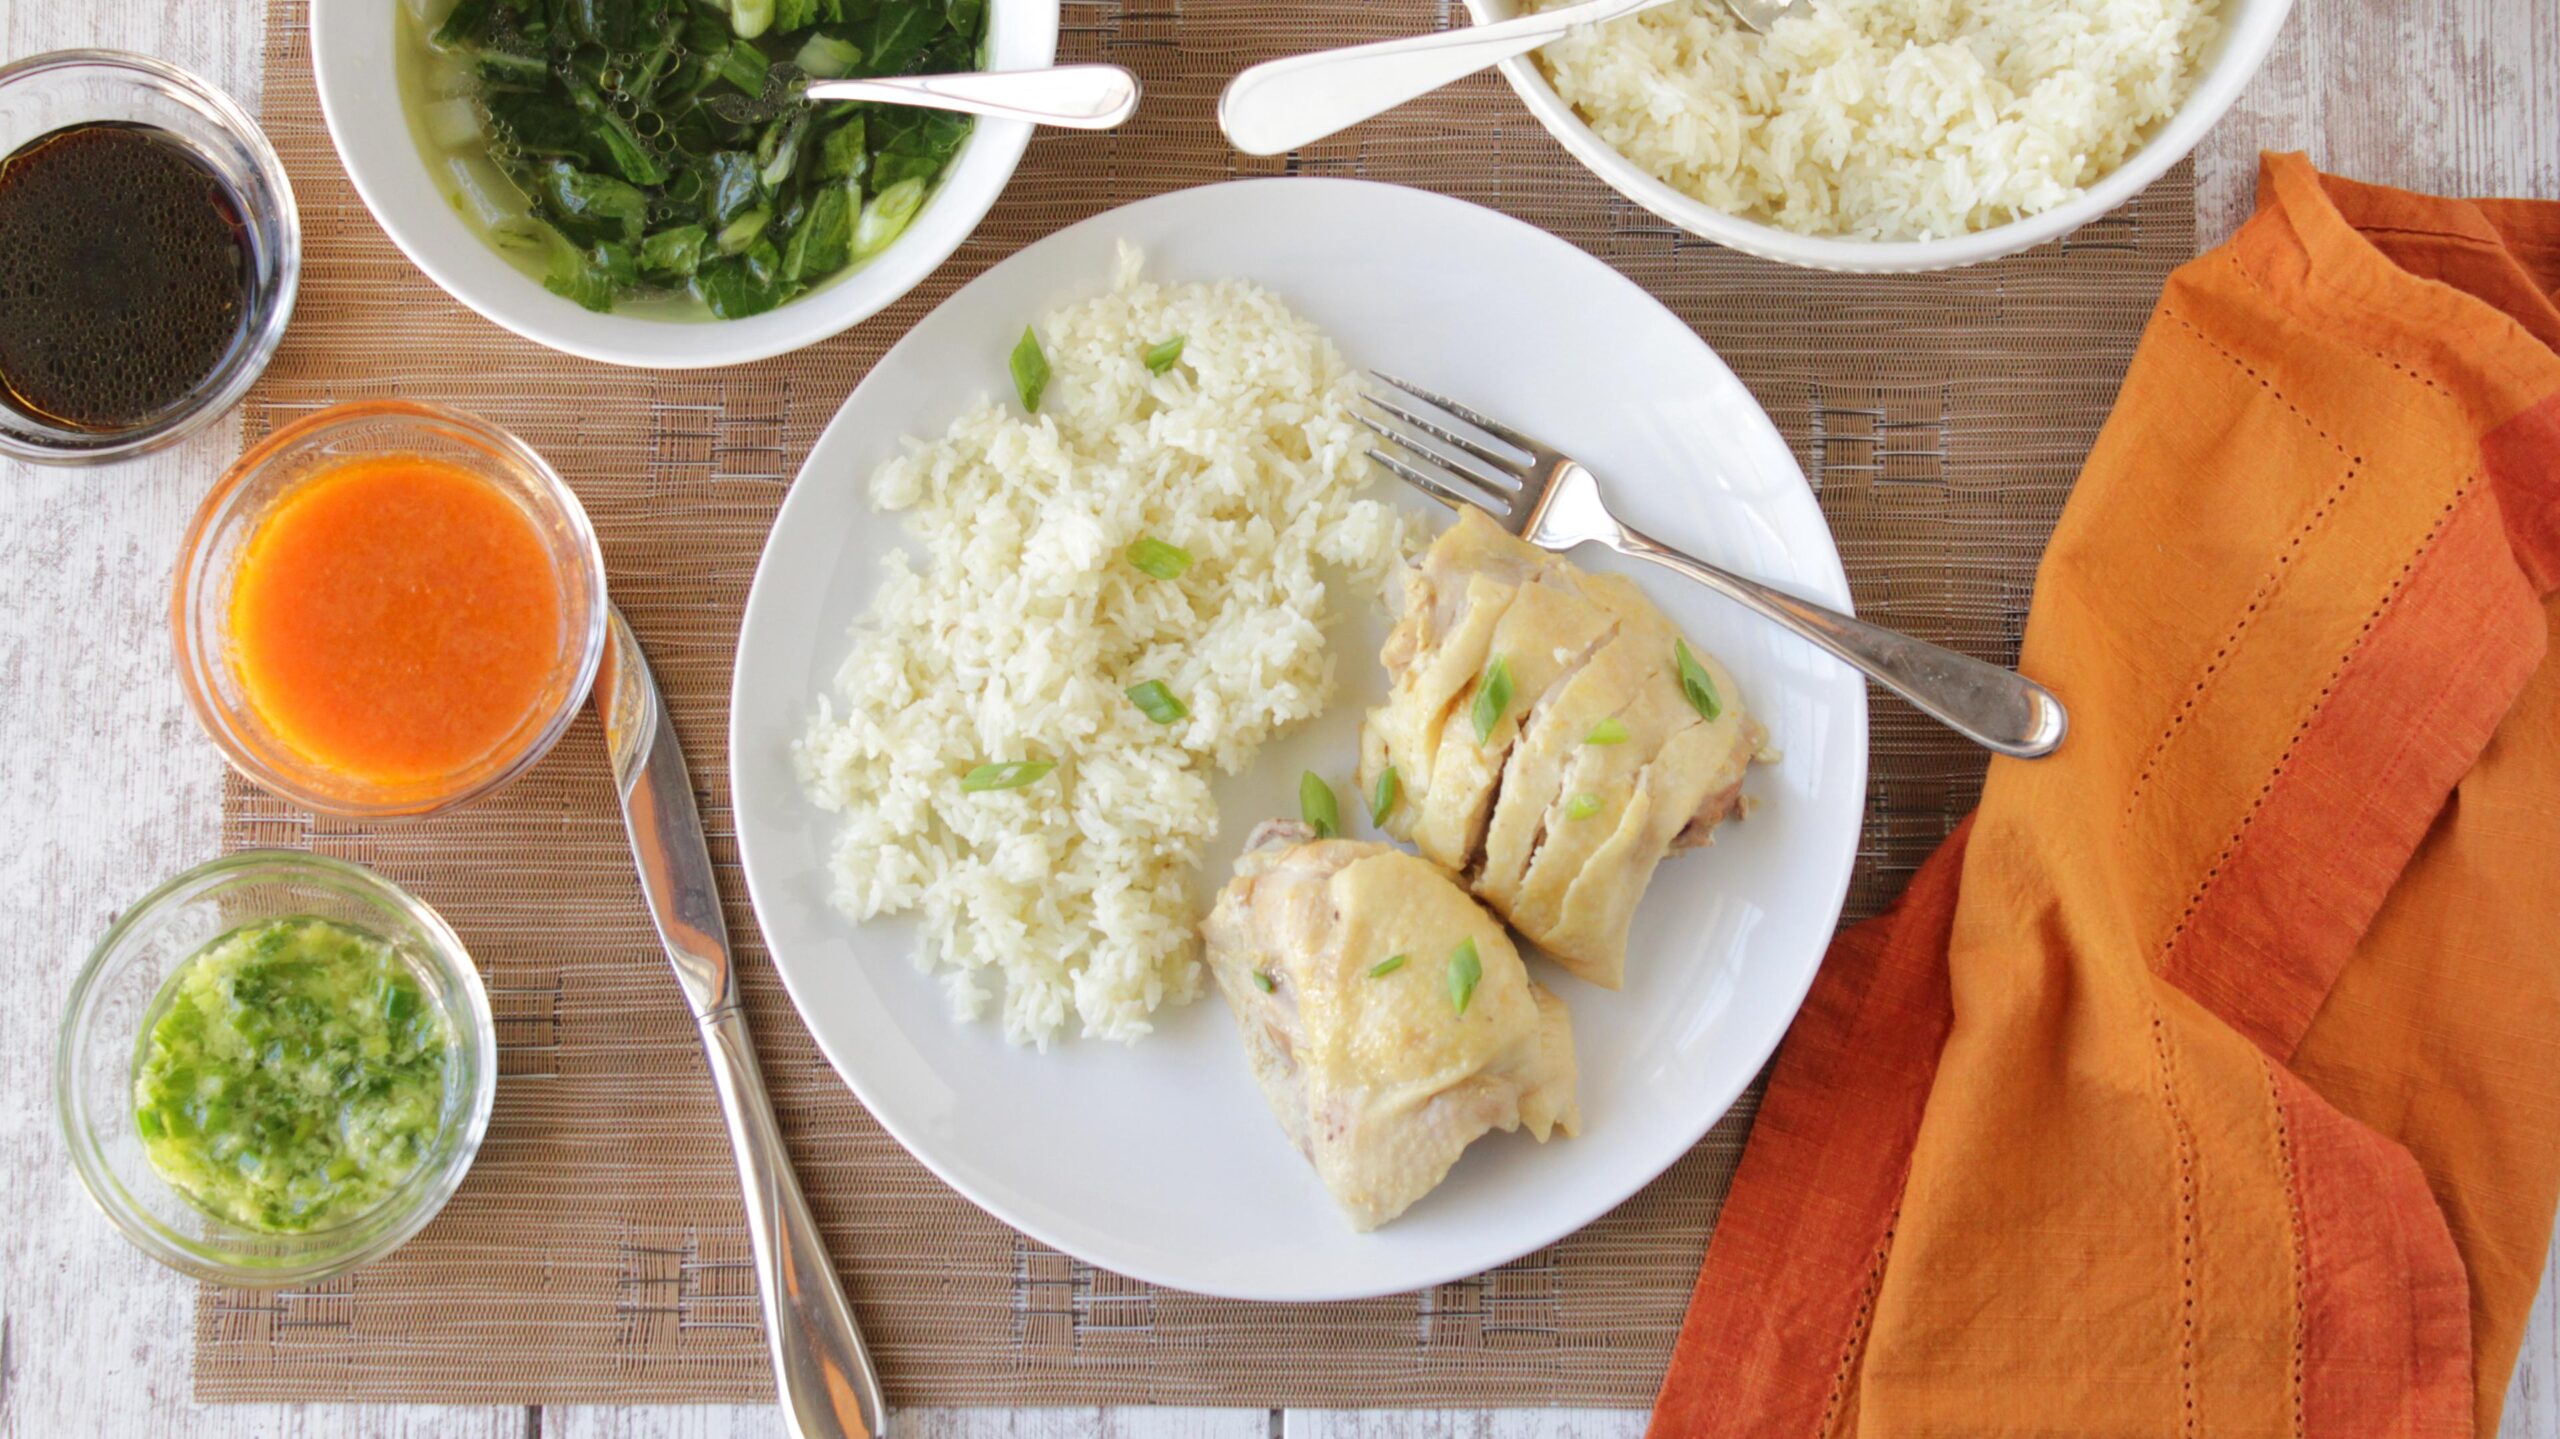  Juicy and tender Hainanese chicken with fragrant rice cooked to perfection.